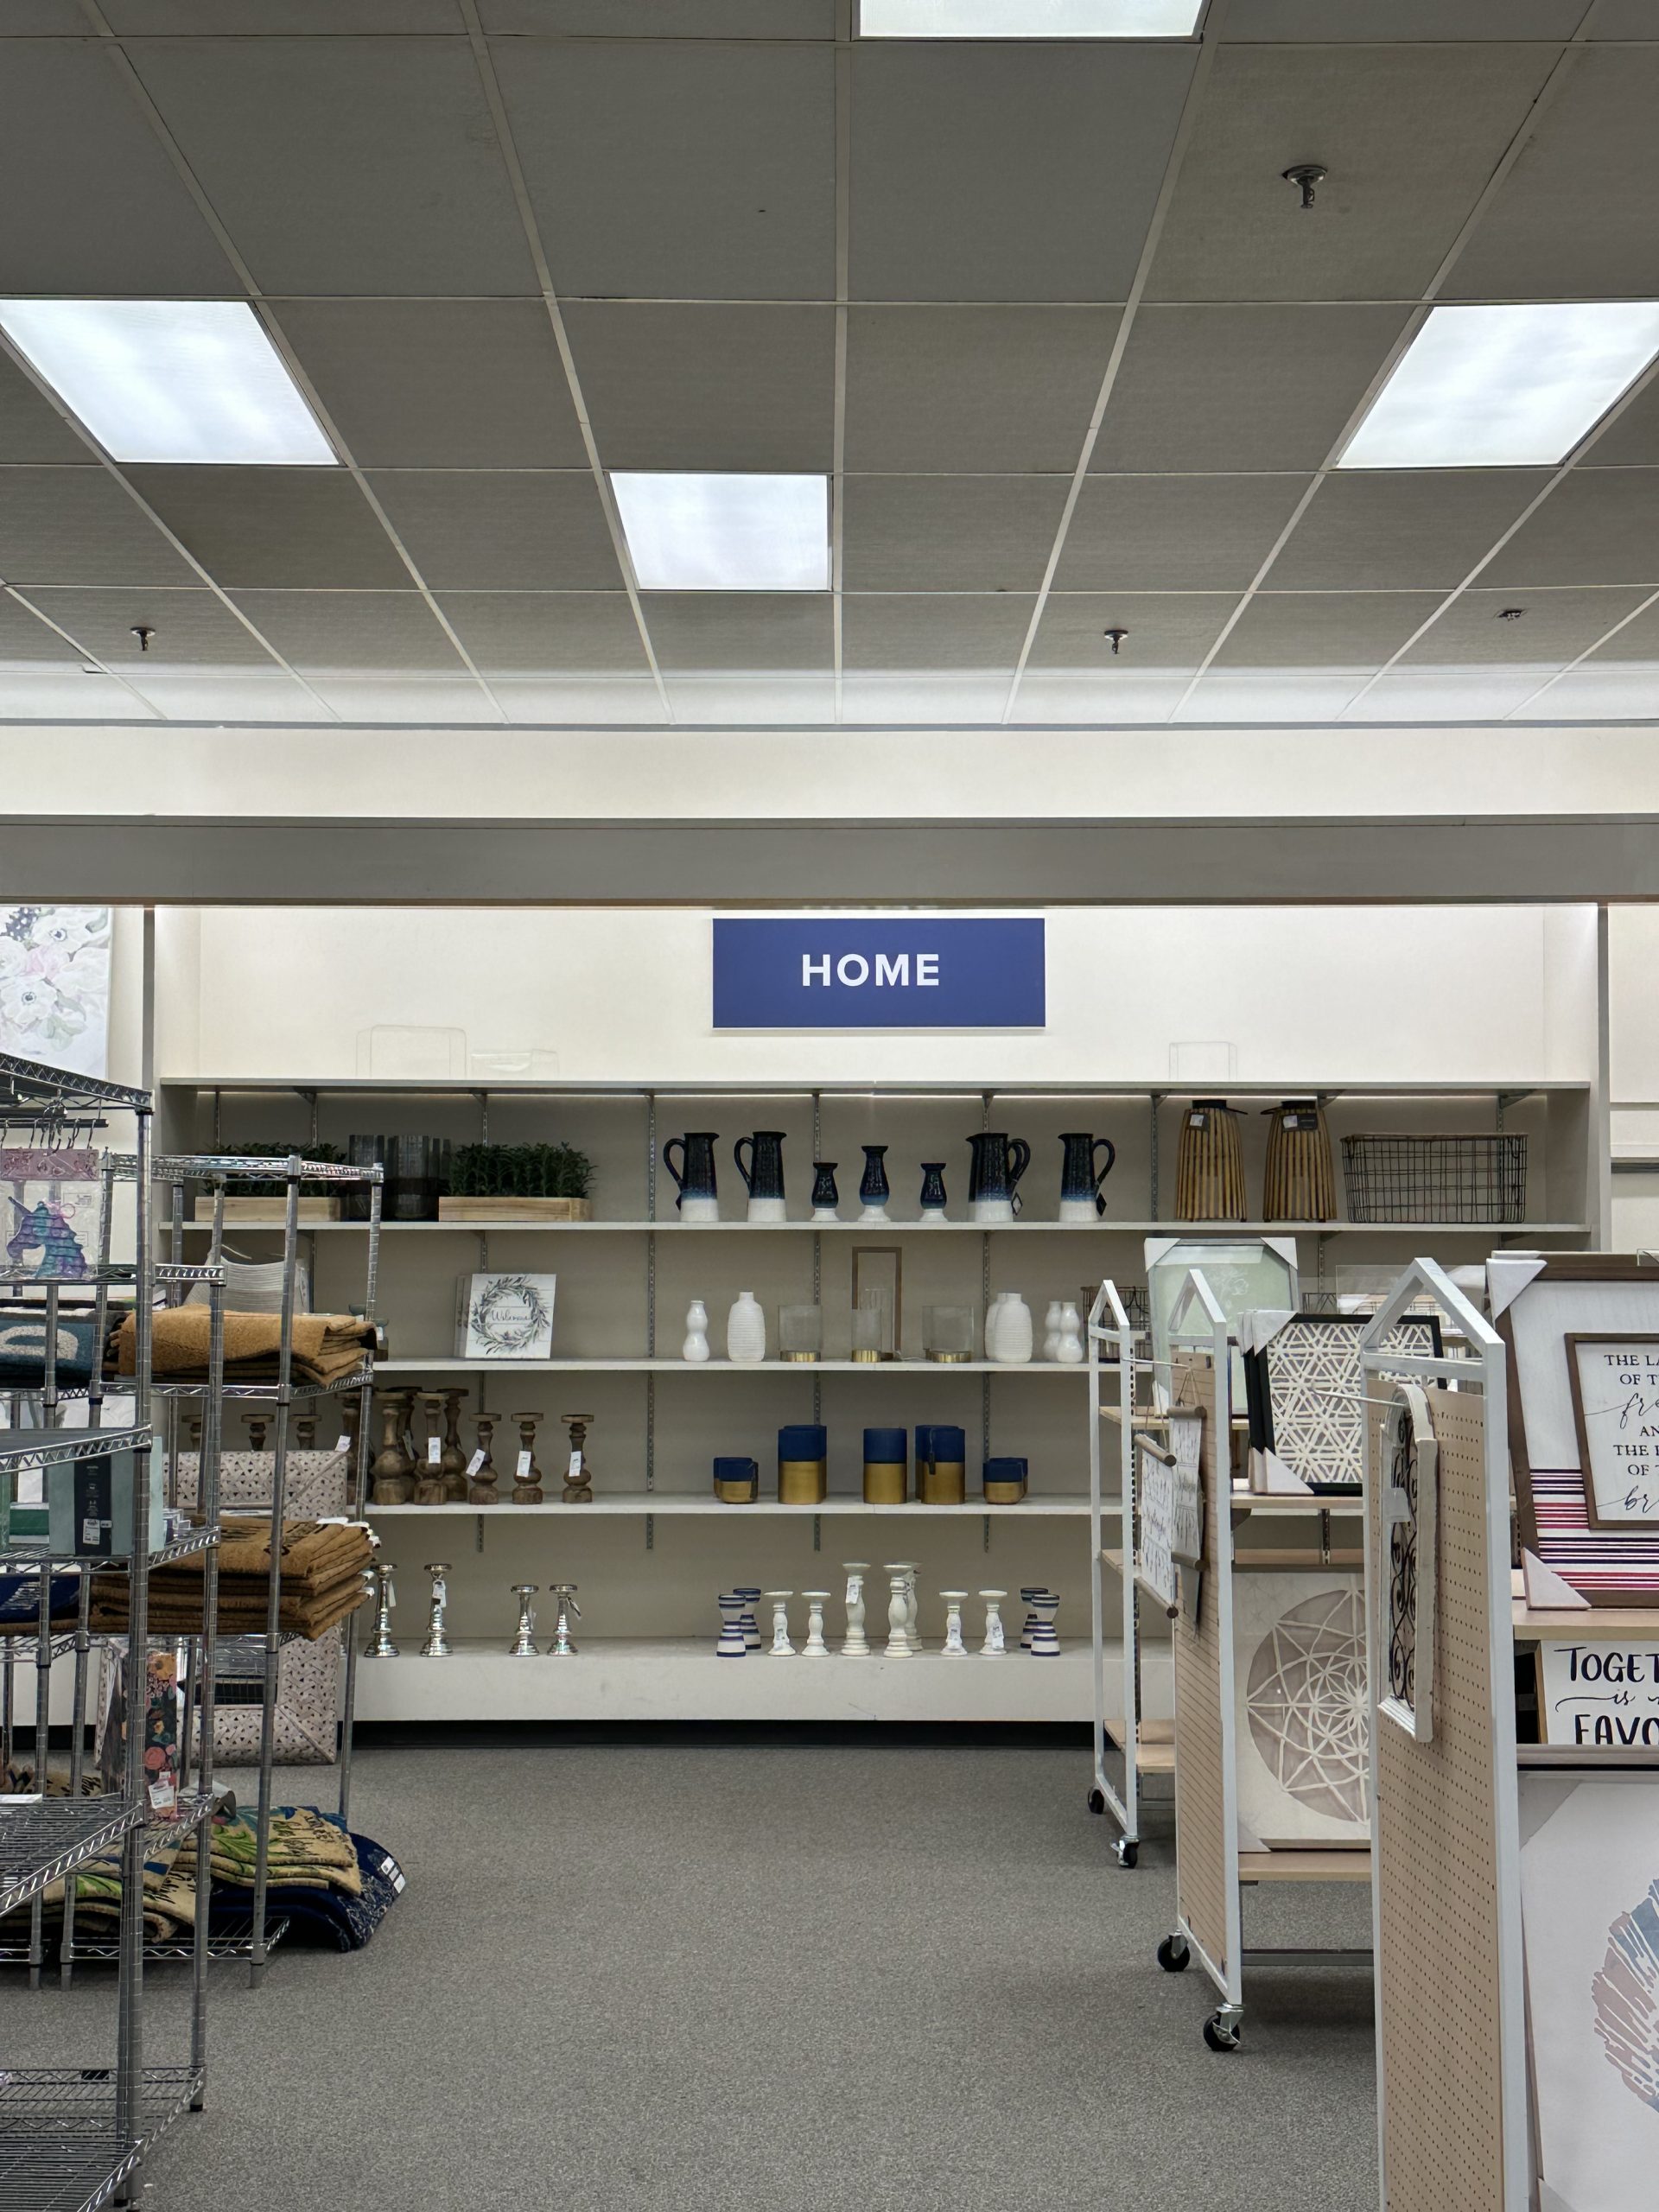 Belk Outlet Store Now Open - Who's On The Move